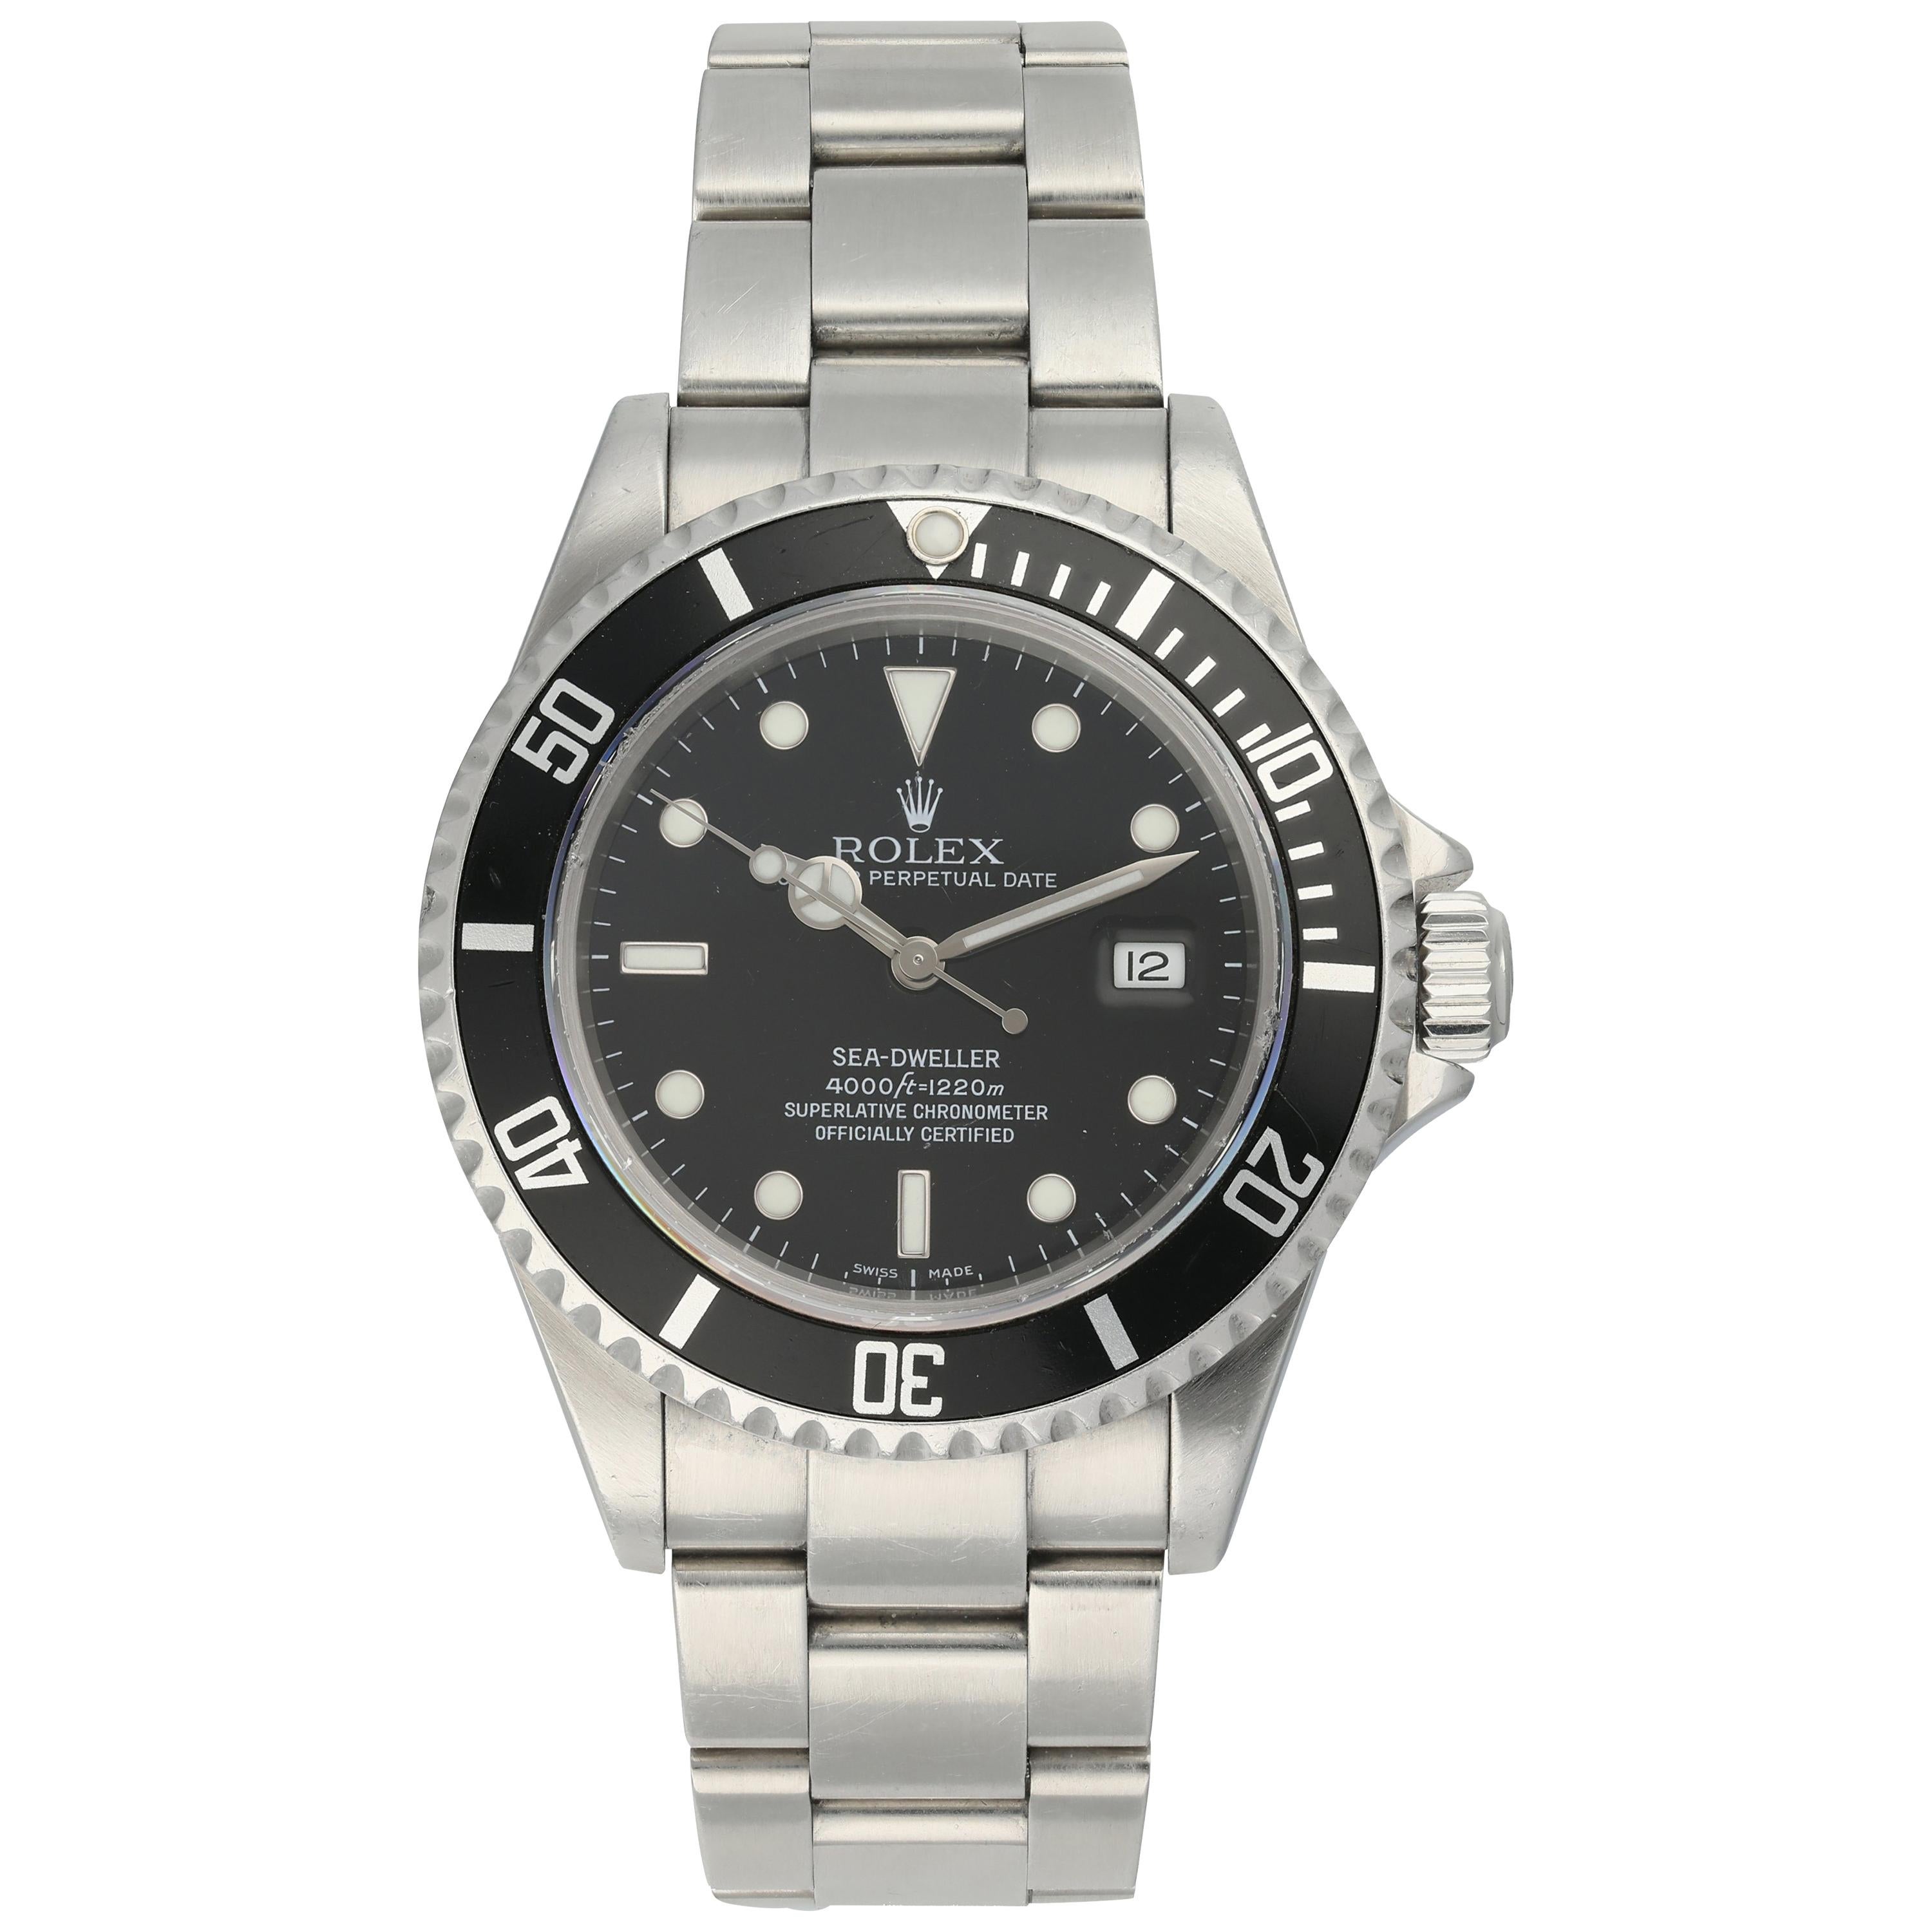 Rolex Oyster Perpetual Sea-Dweller 16600 Men's Watch For Sale